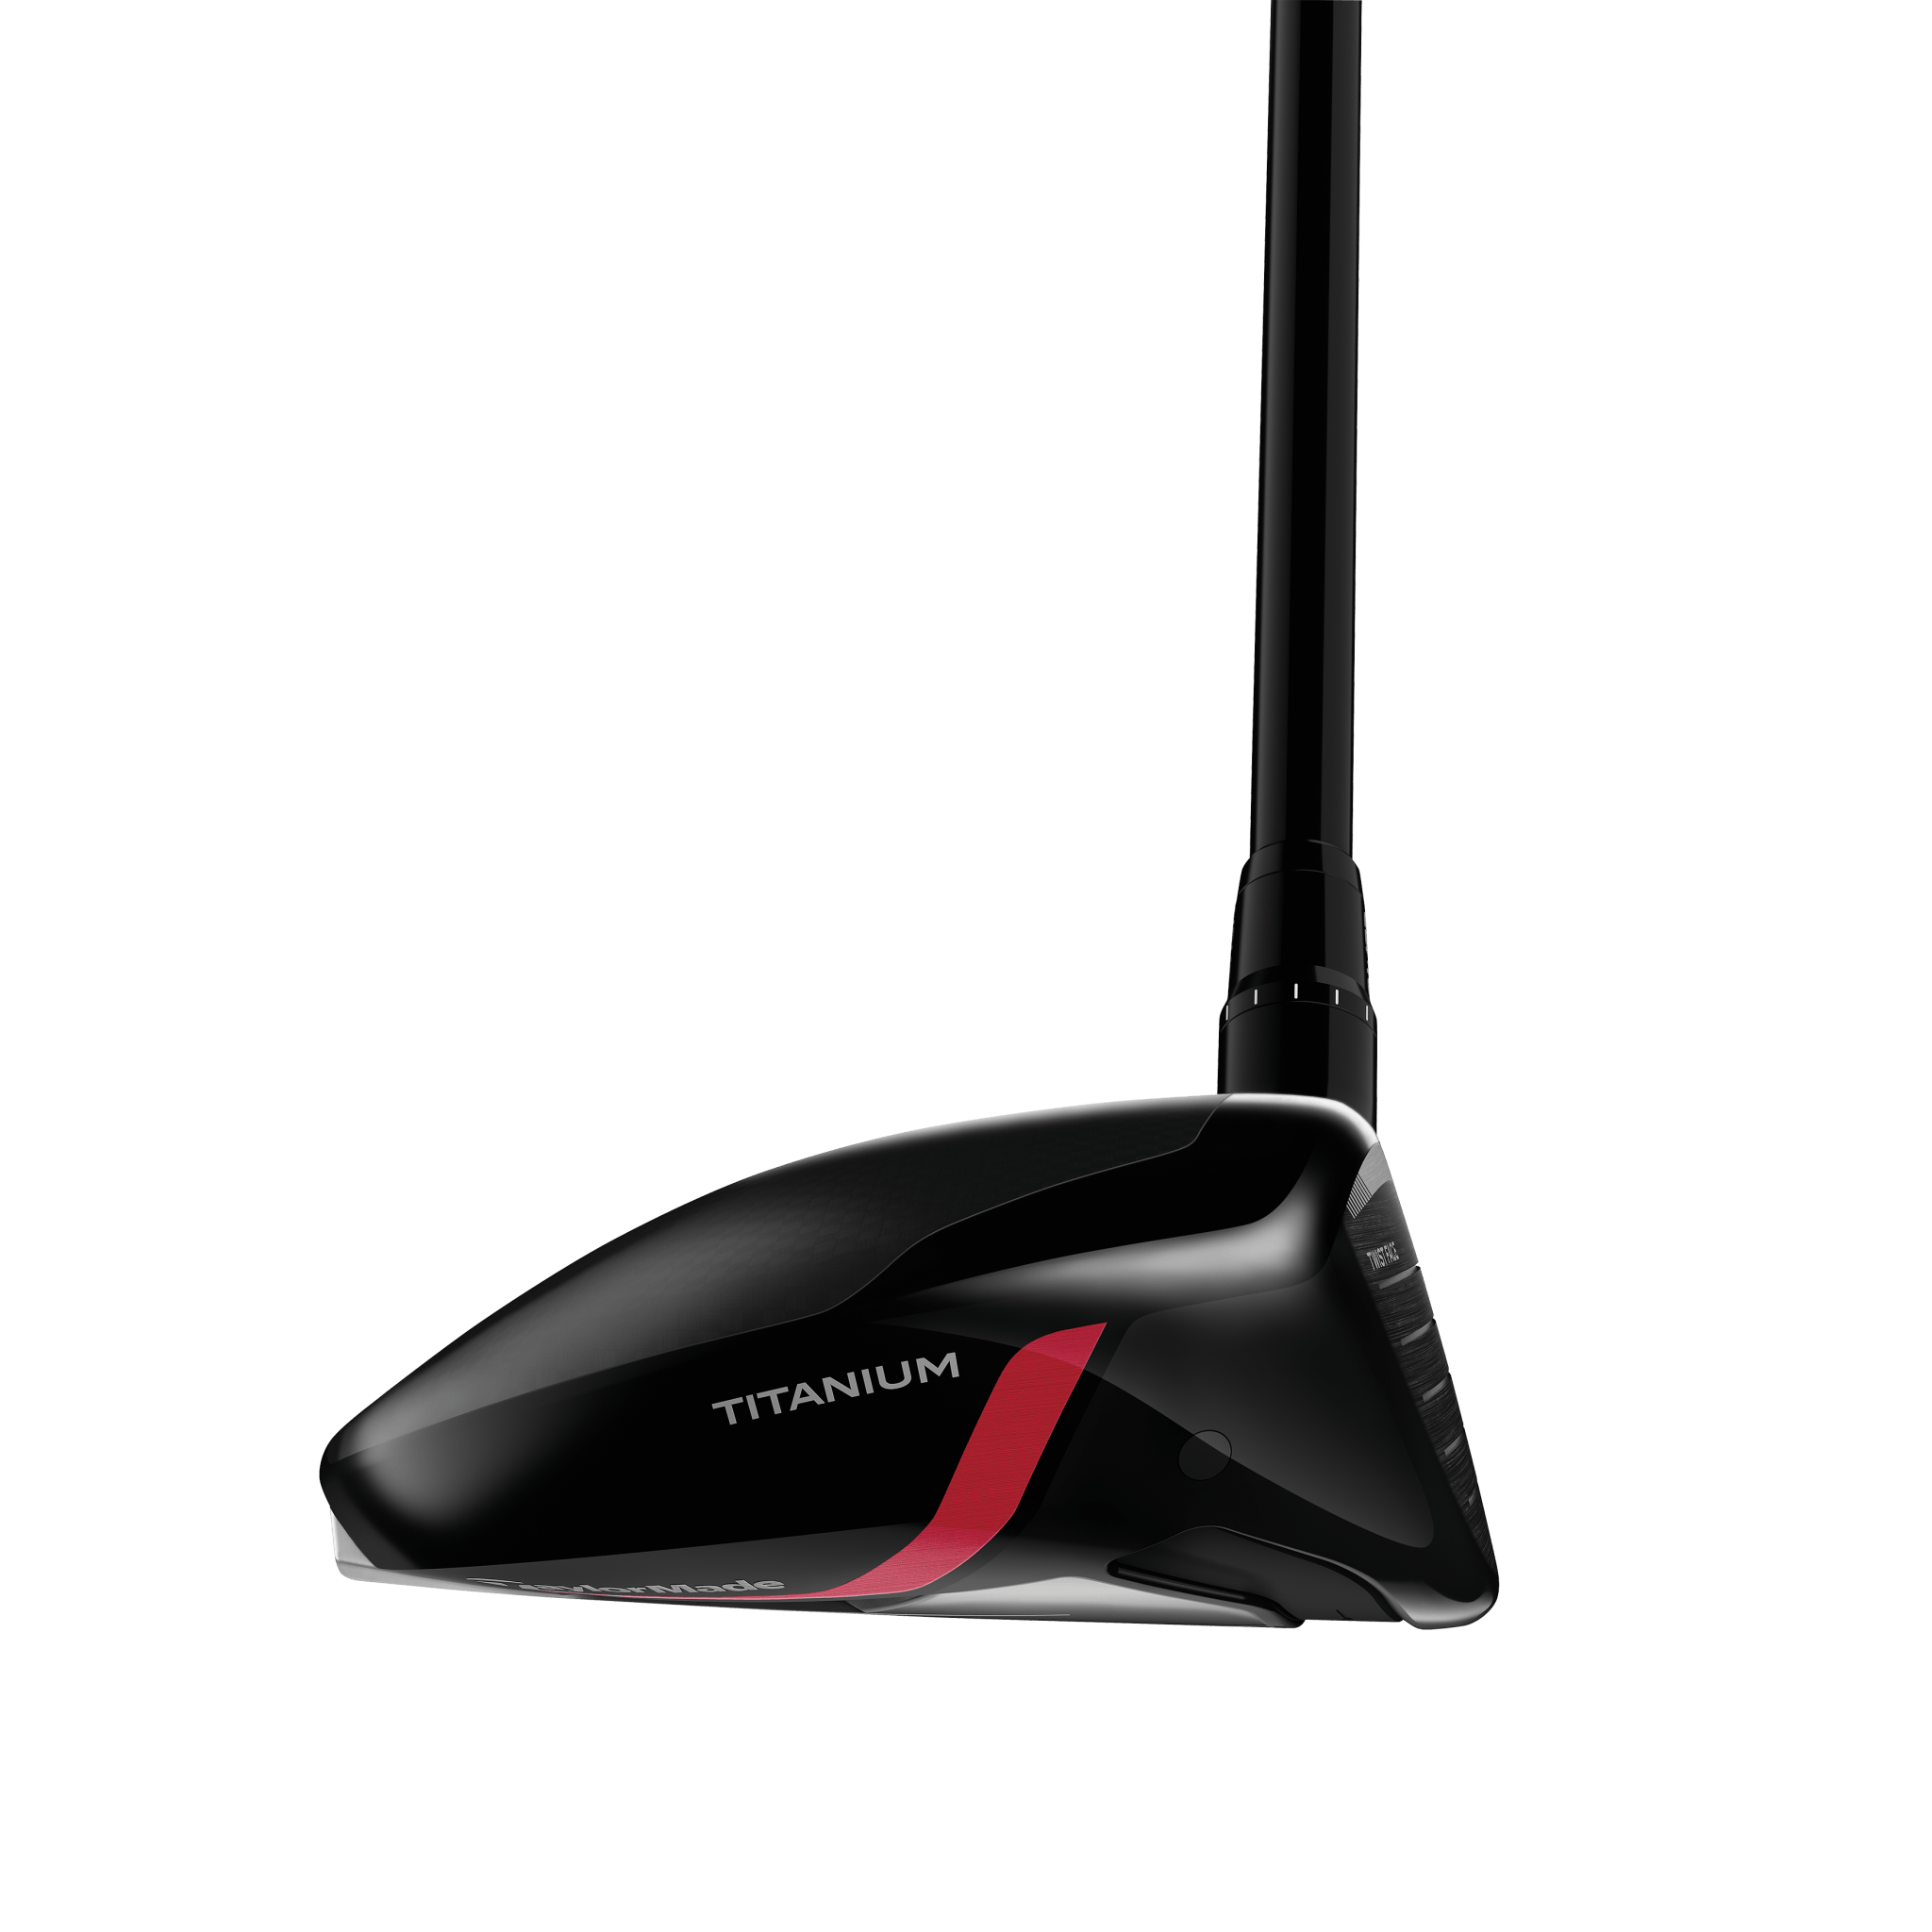 TaylorMade Stealth Plus+ Fairway Wood · Right handed · Regular · 3W